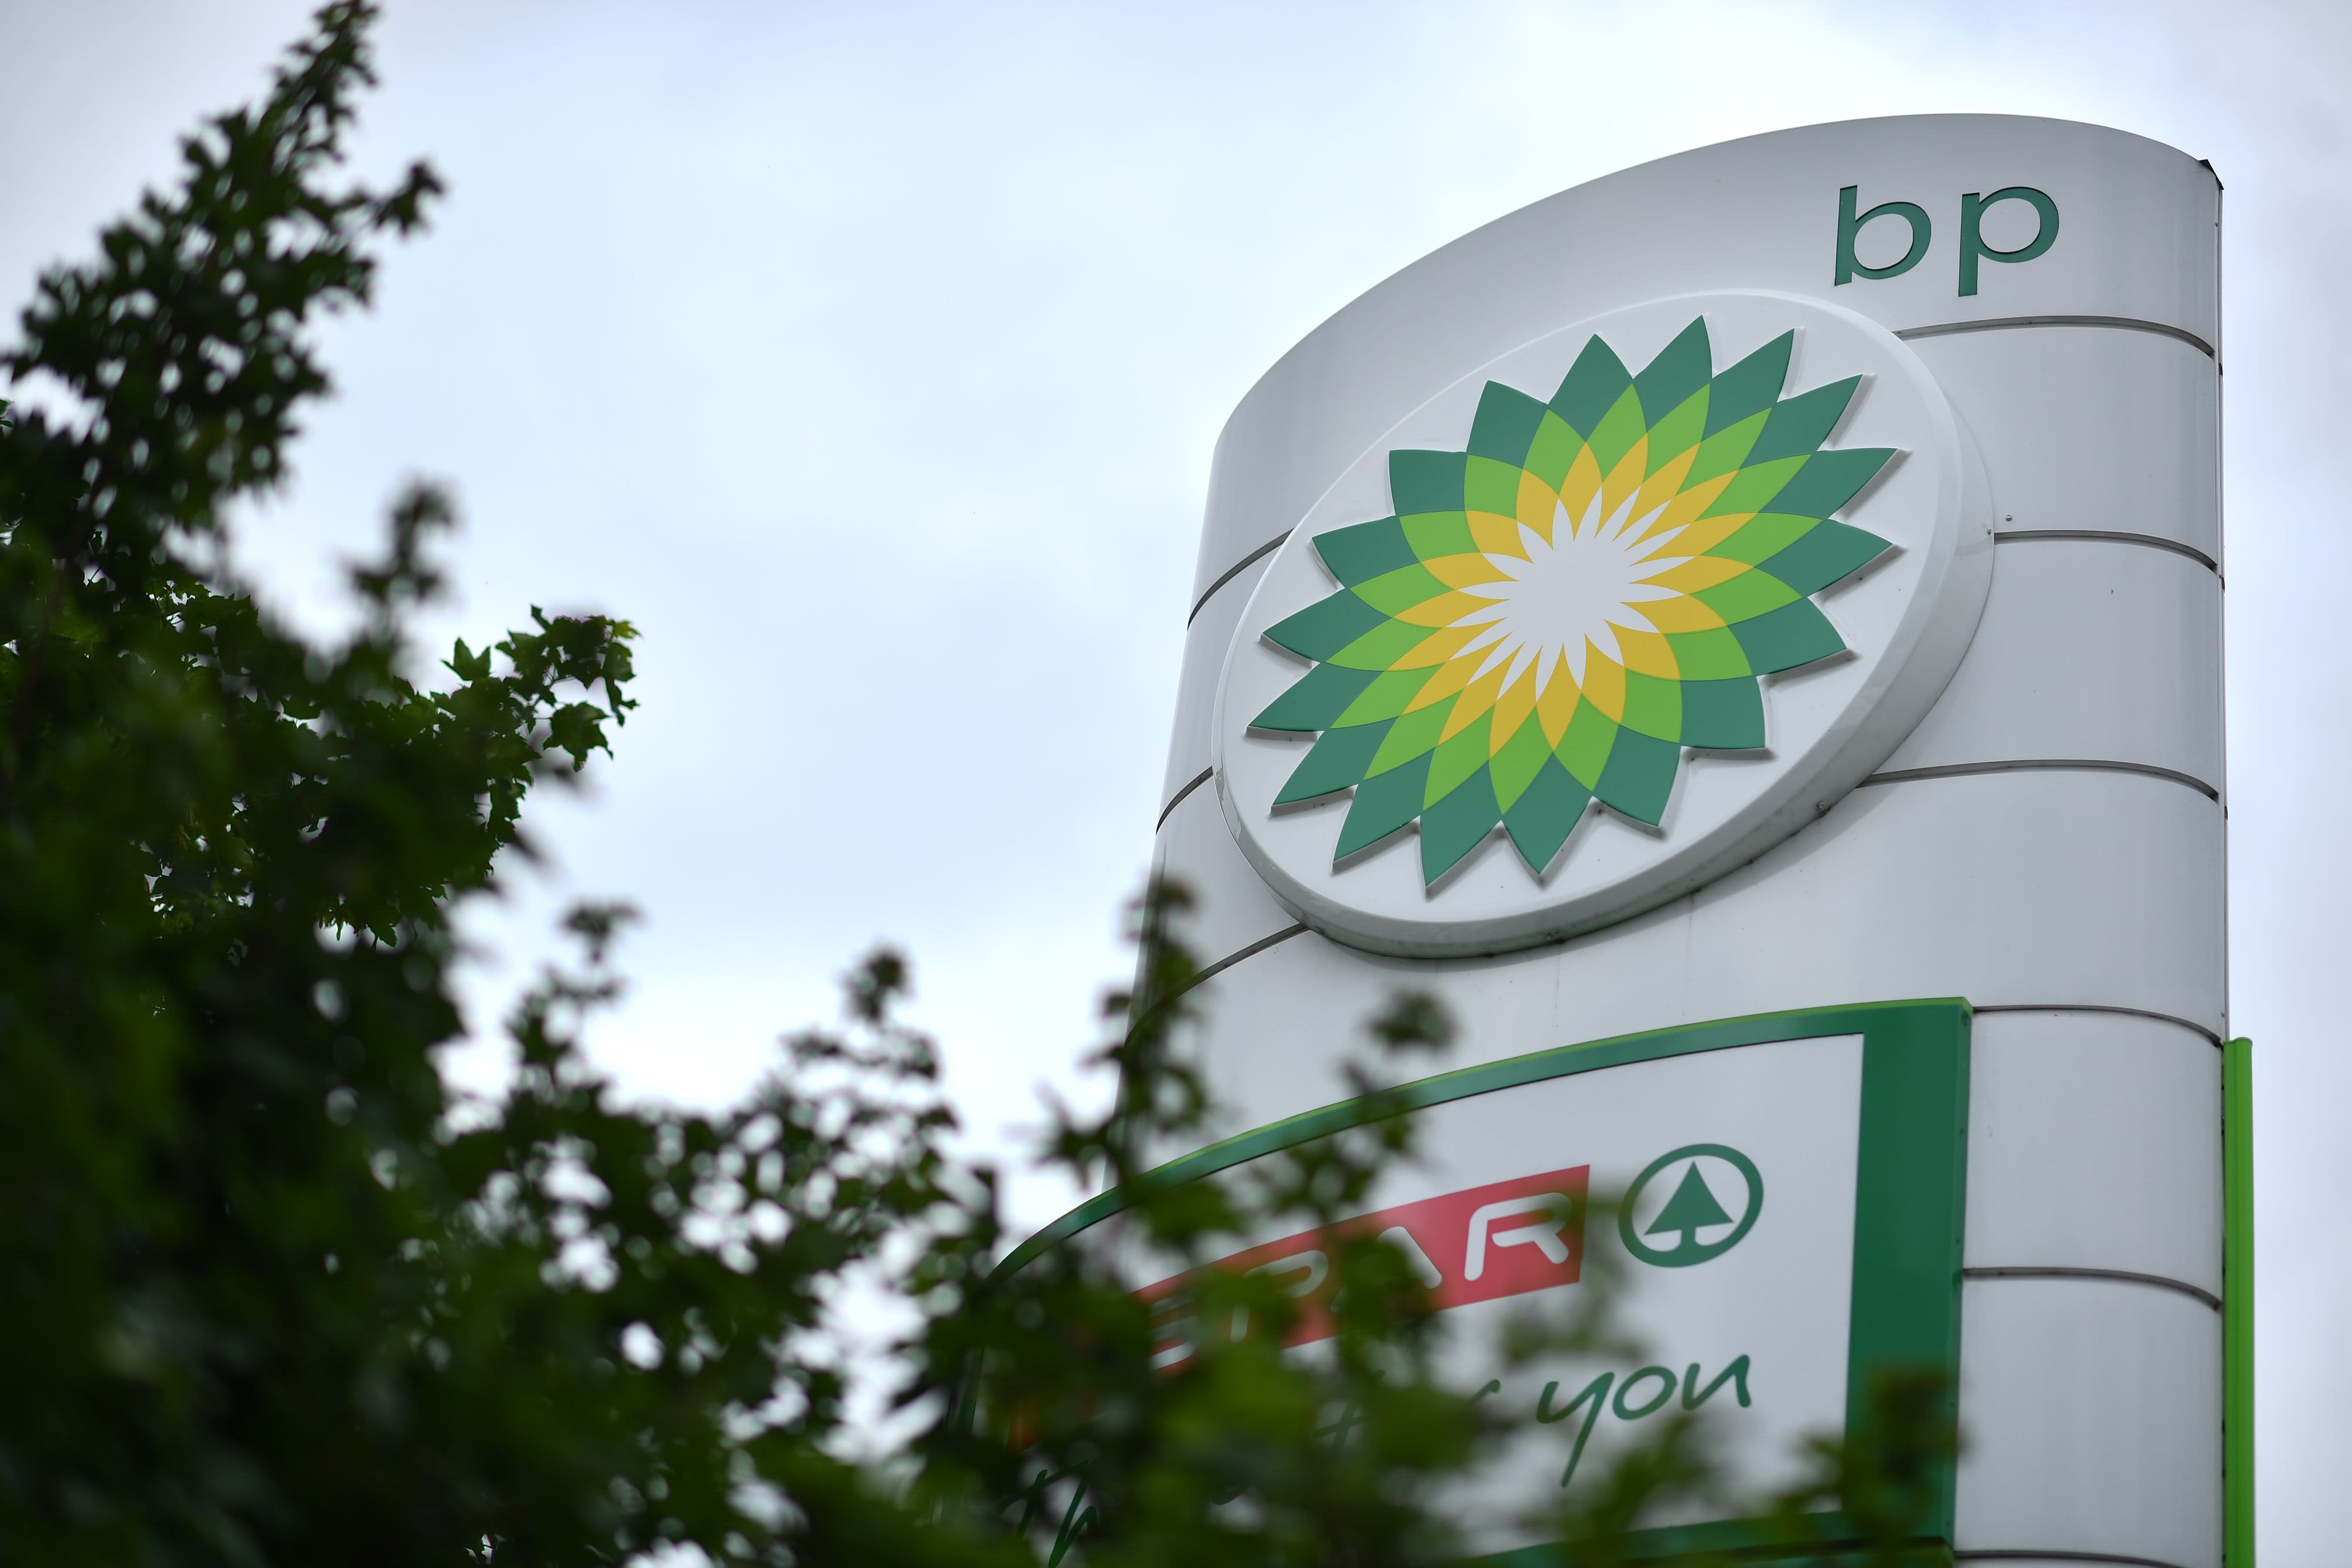 Oil giant BP ups dividend and confirms share buybacks as it posts better-than-expected quarterly profit